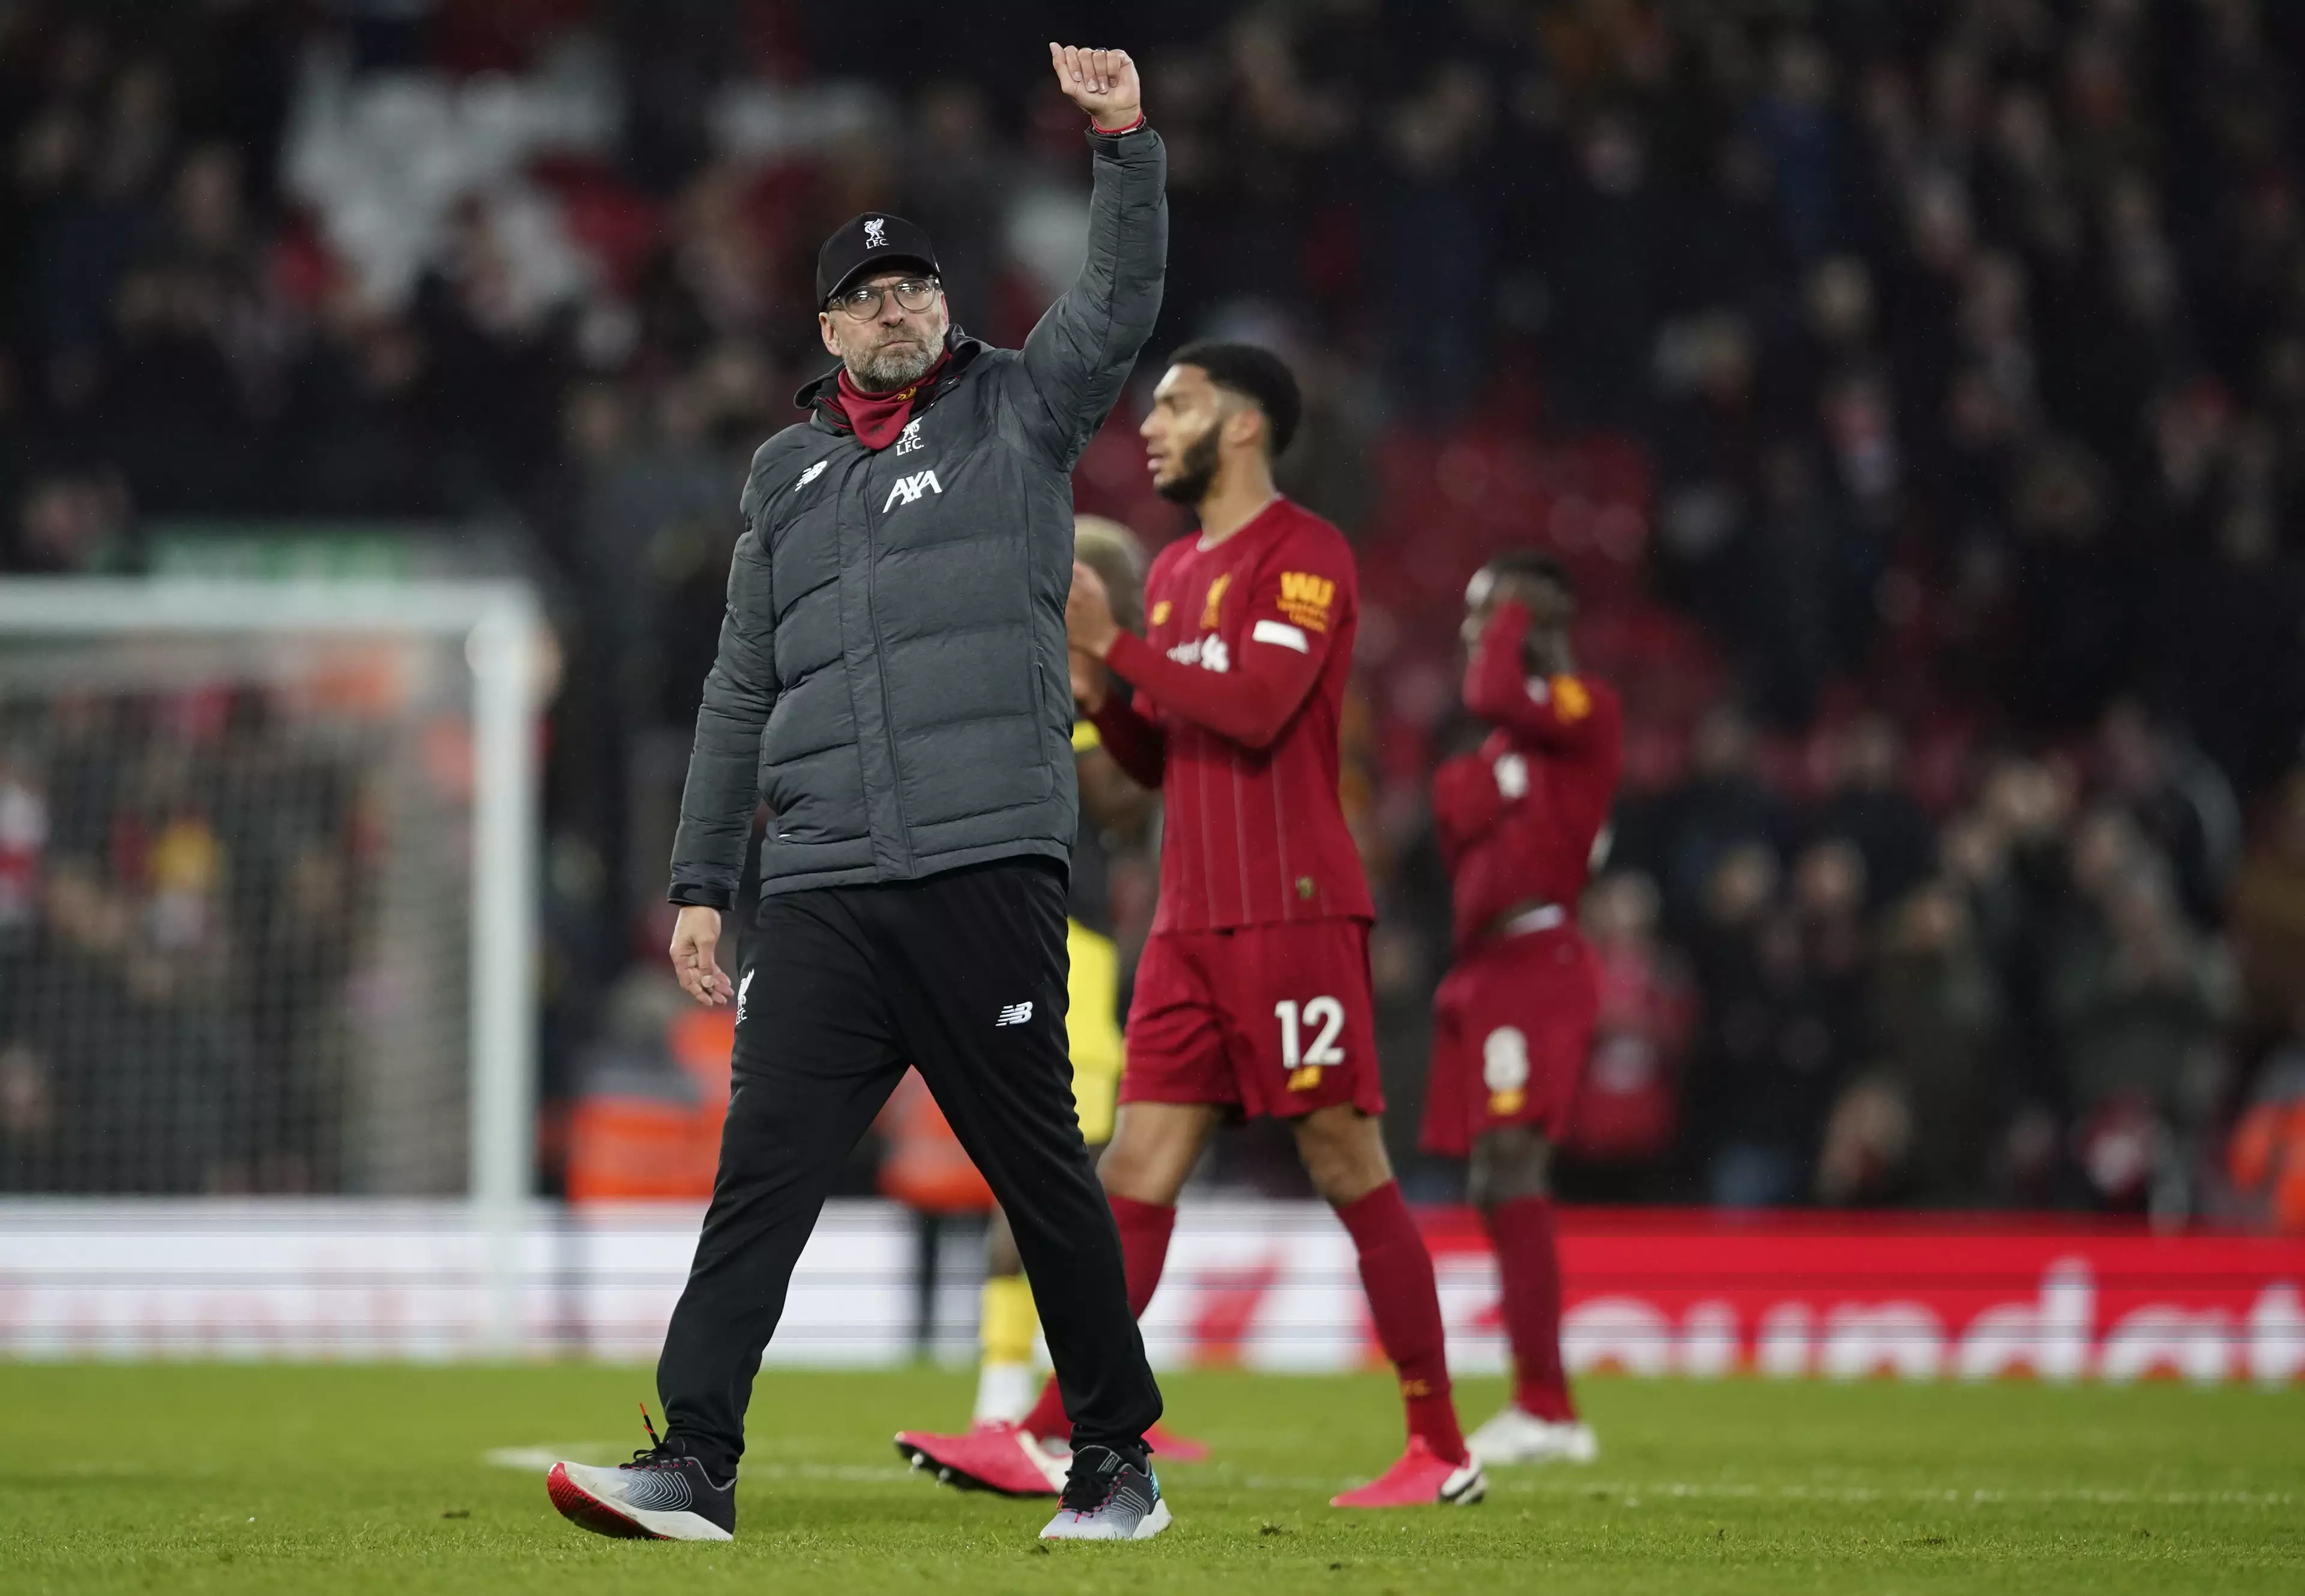 Jurgen Klopp salutes the fans at Anfield. Image: PA Images